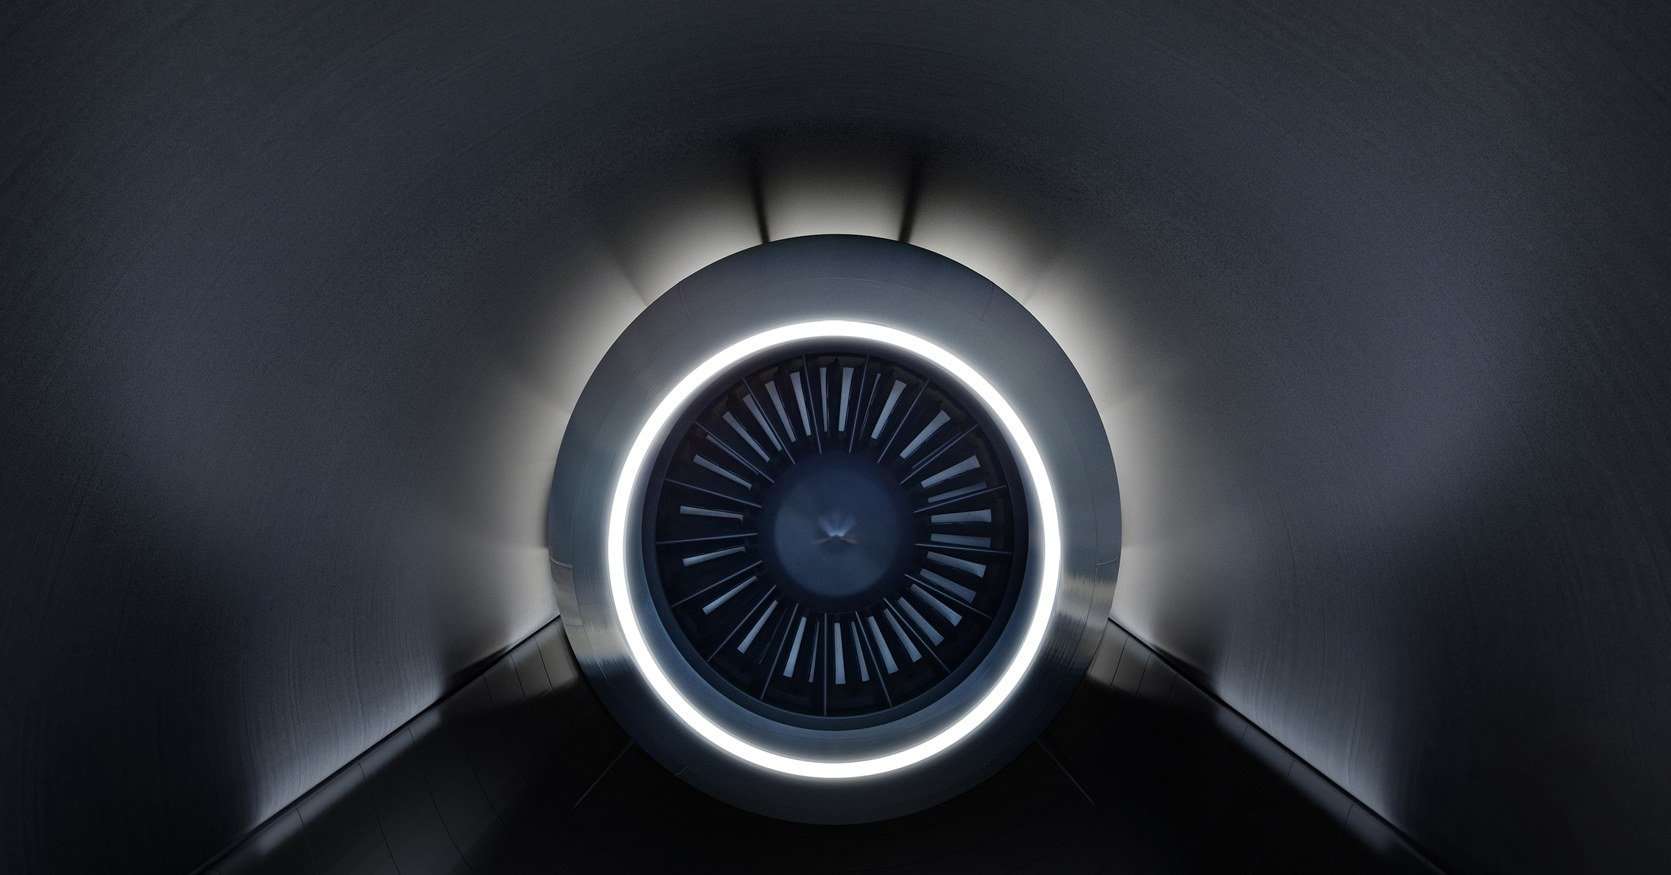 image for The Hyperloop Industry Could Make Boring Old Trains and Planes Faster and Comfier